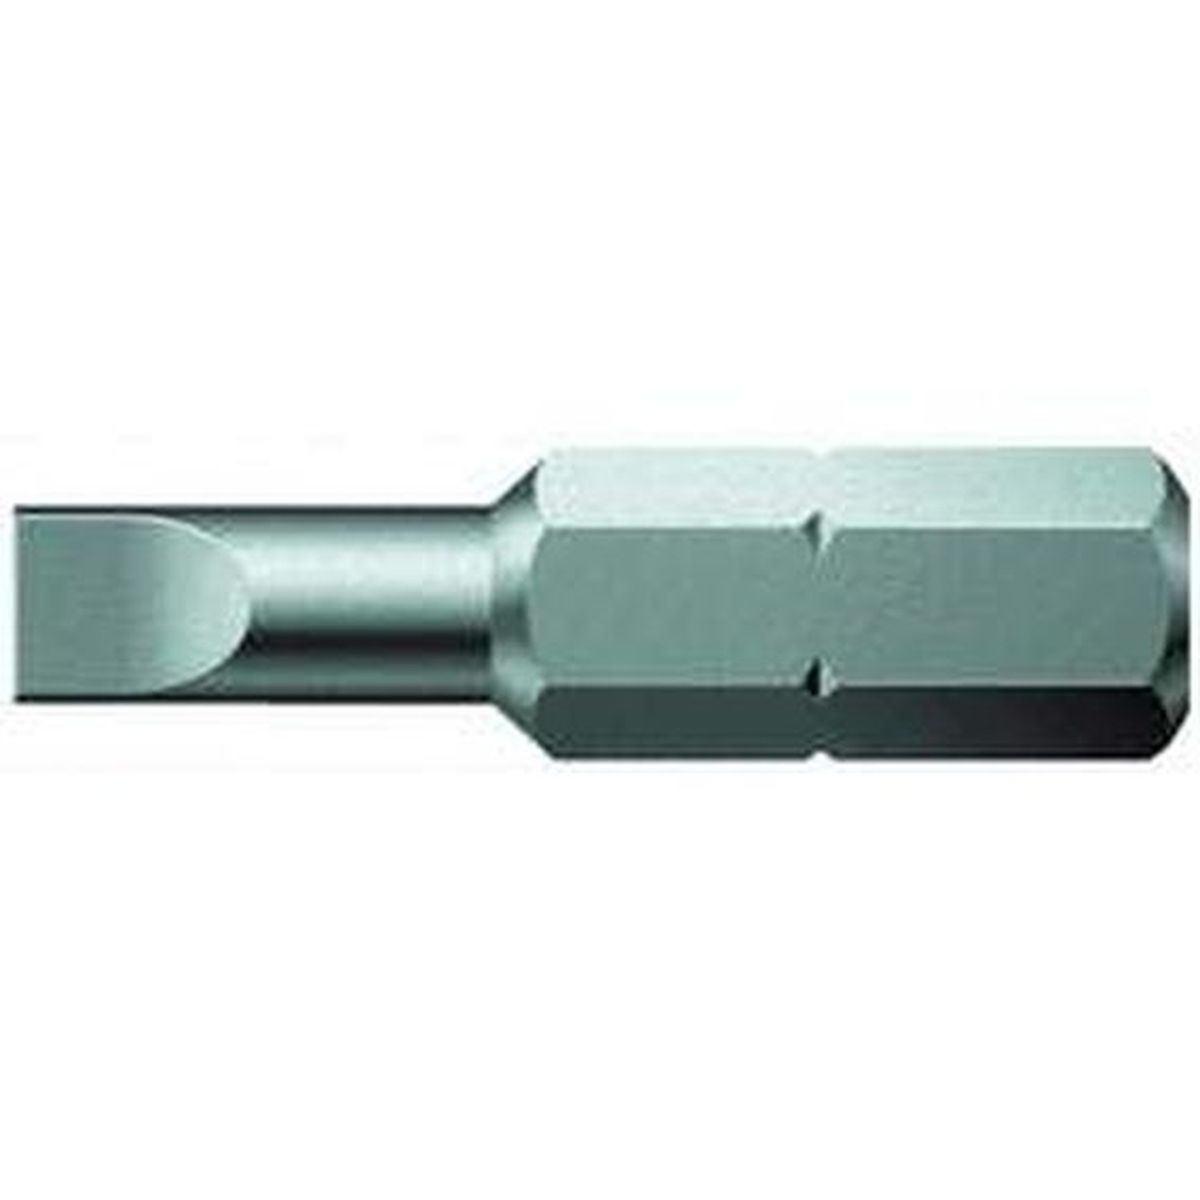 WERA Bits for slotted screws 800/1 Z 1,2 x 6,5 x 39 mm